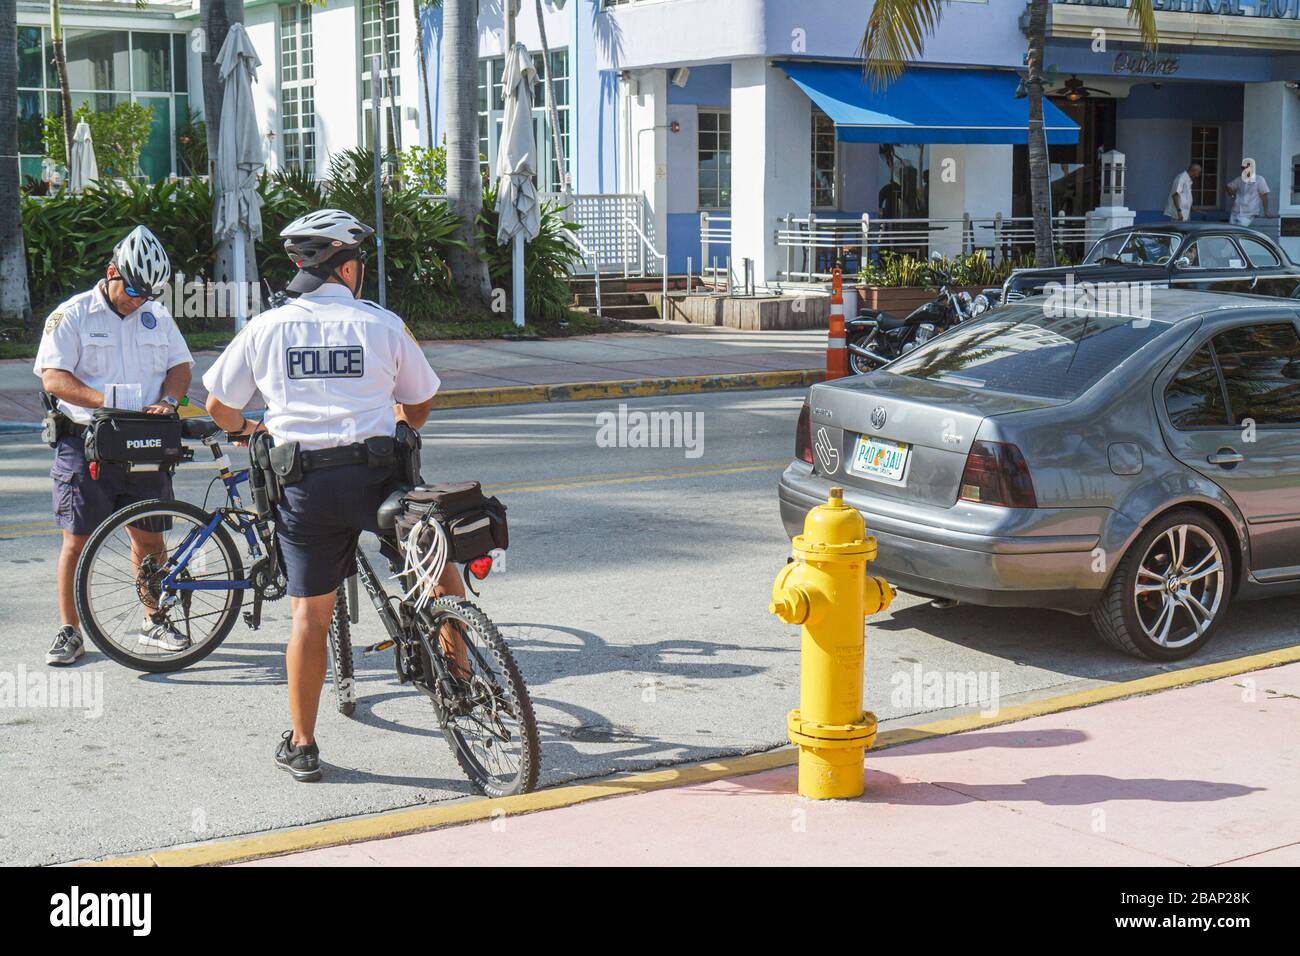 Miami Beach Florida,Ocean Drive,police,policeman,policemen,bicycle patrol,giving,issuing,ticket,illegally parked car cars,vehicle,by fire hydrant,visi Stock Photo